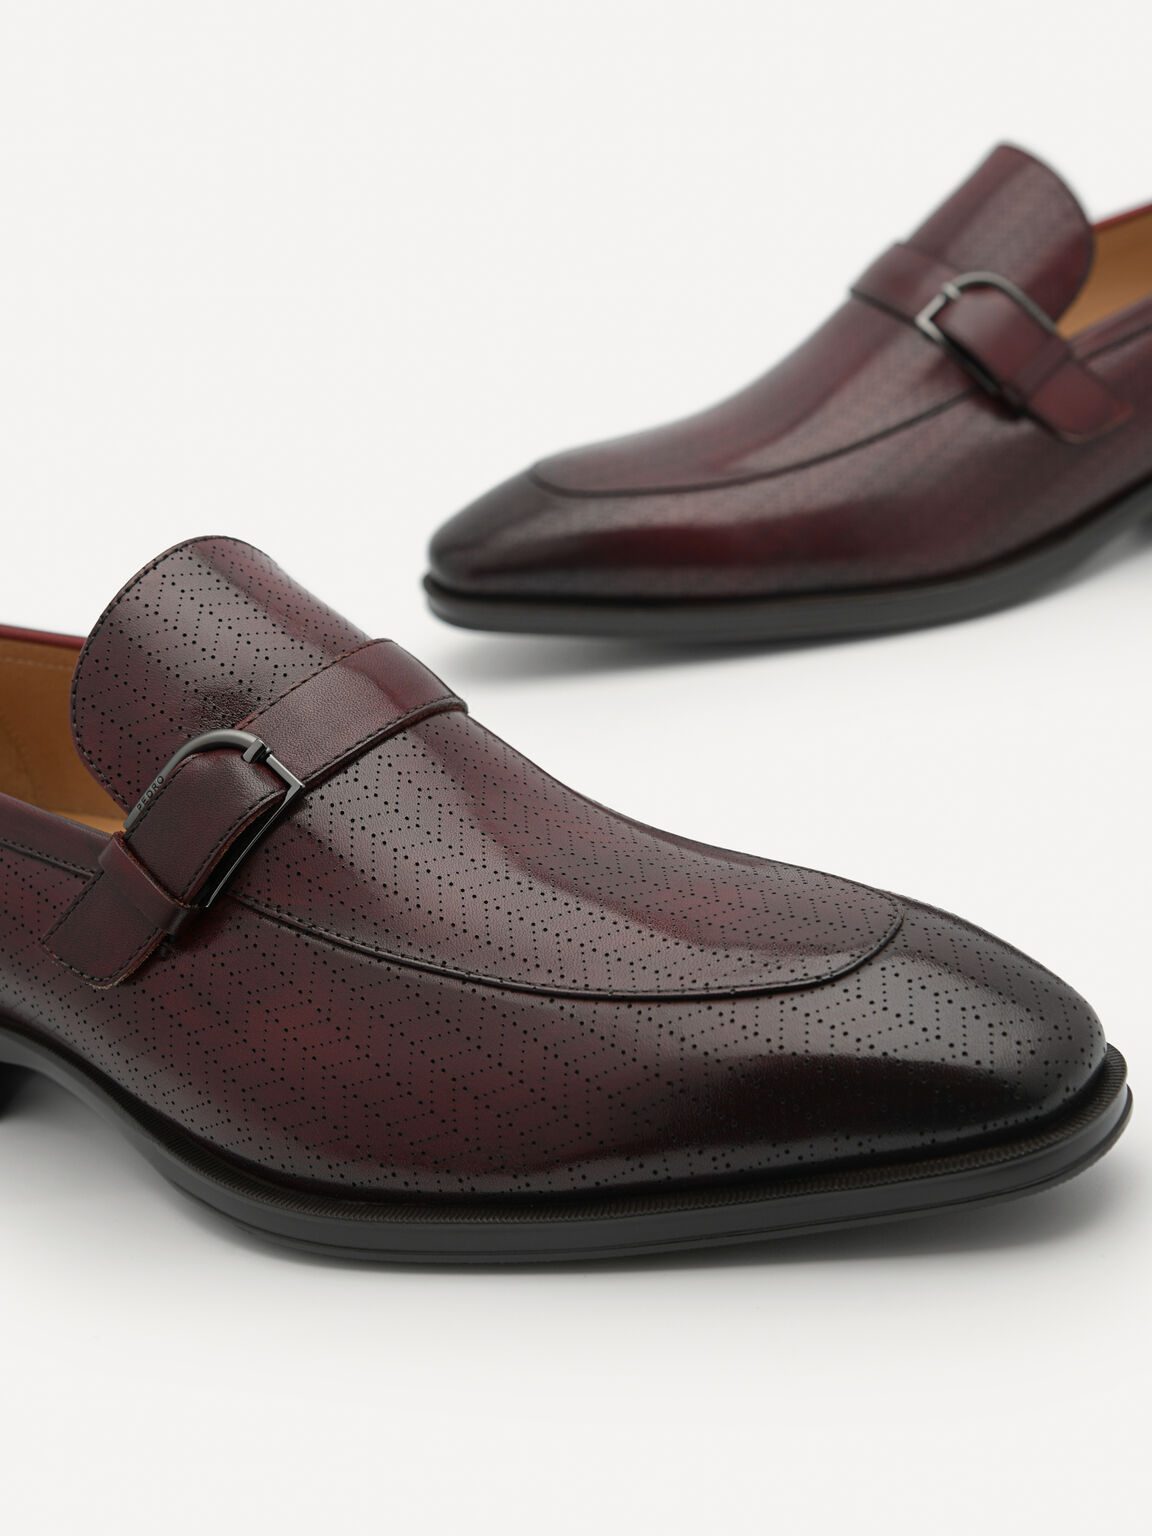 Leather Buckle Loafers, Maroon, hi-res